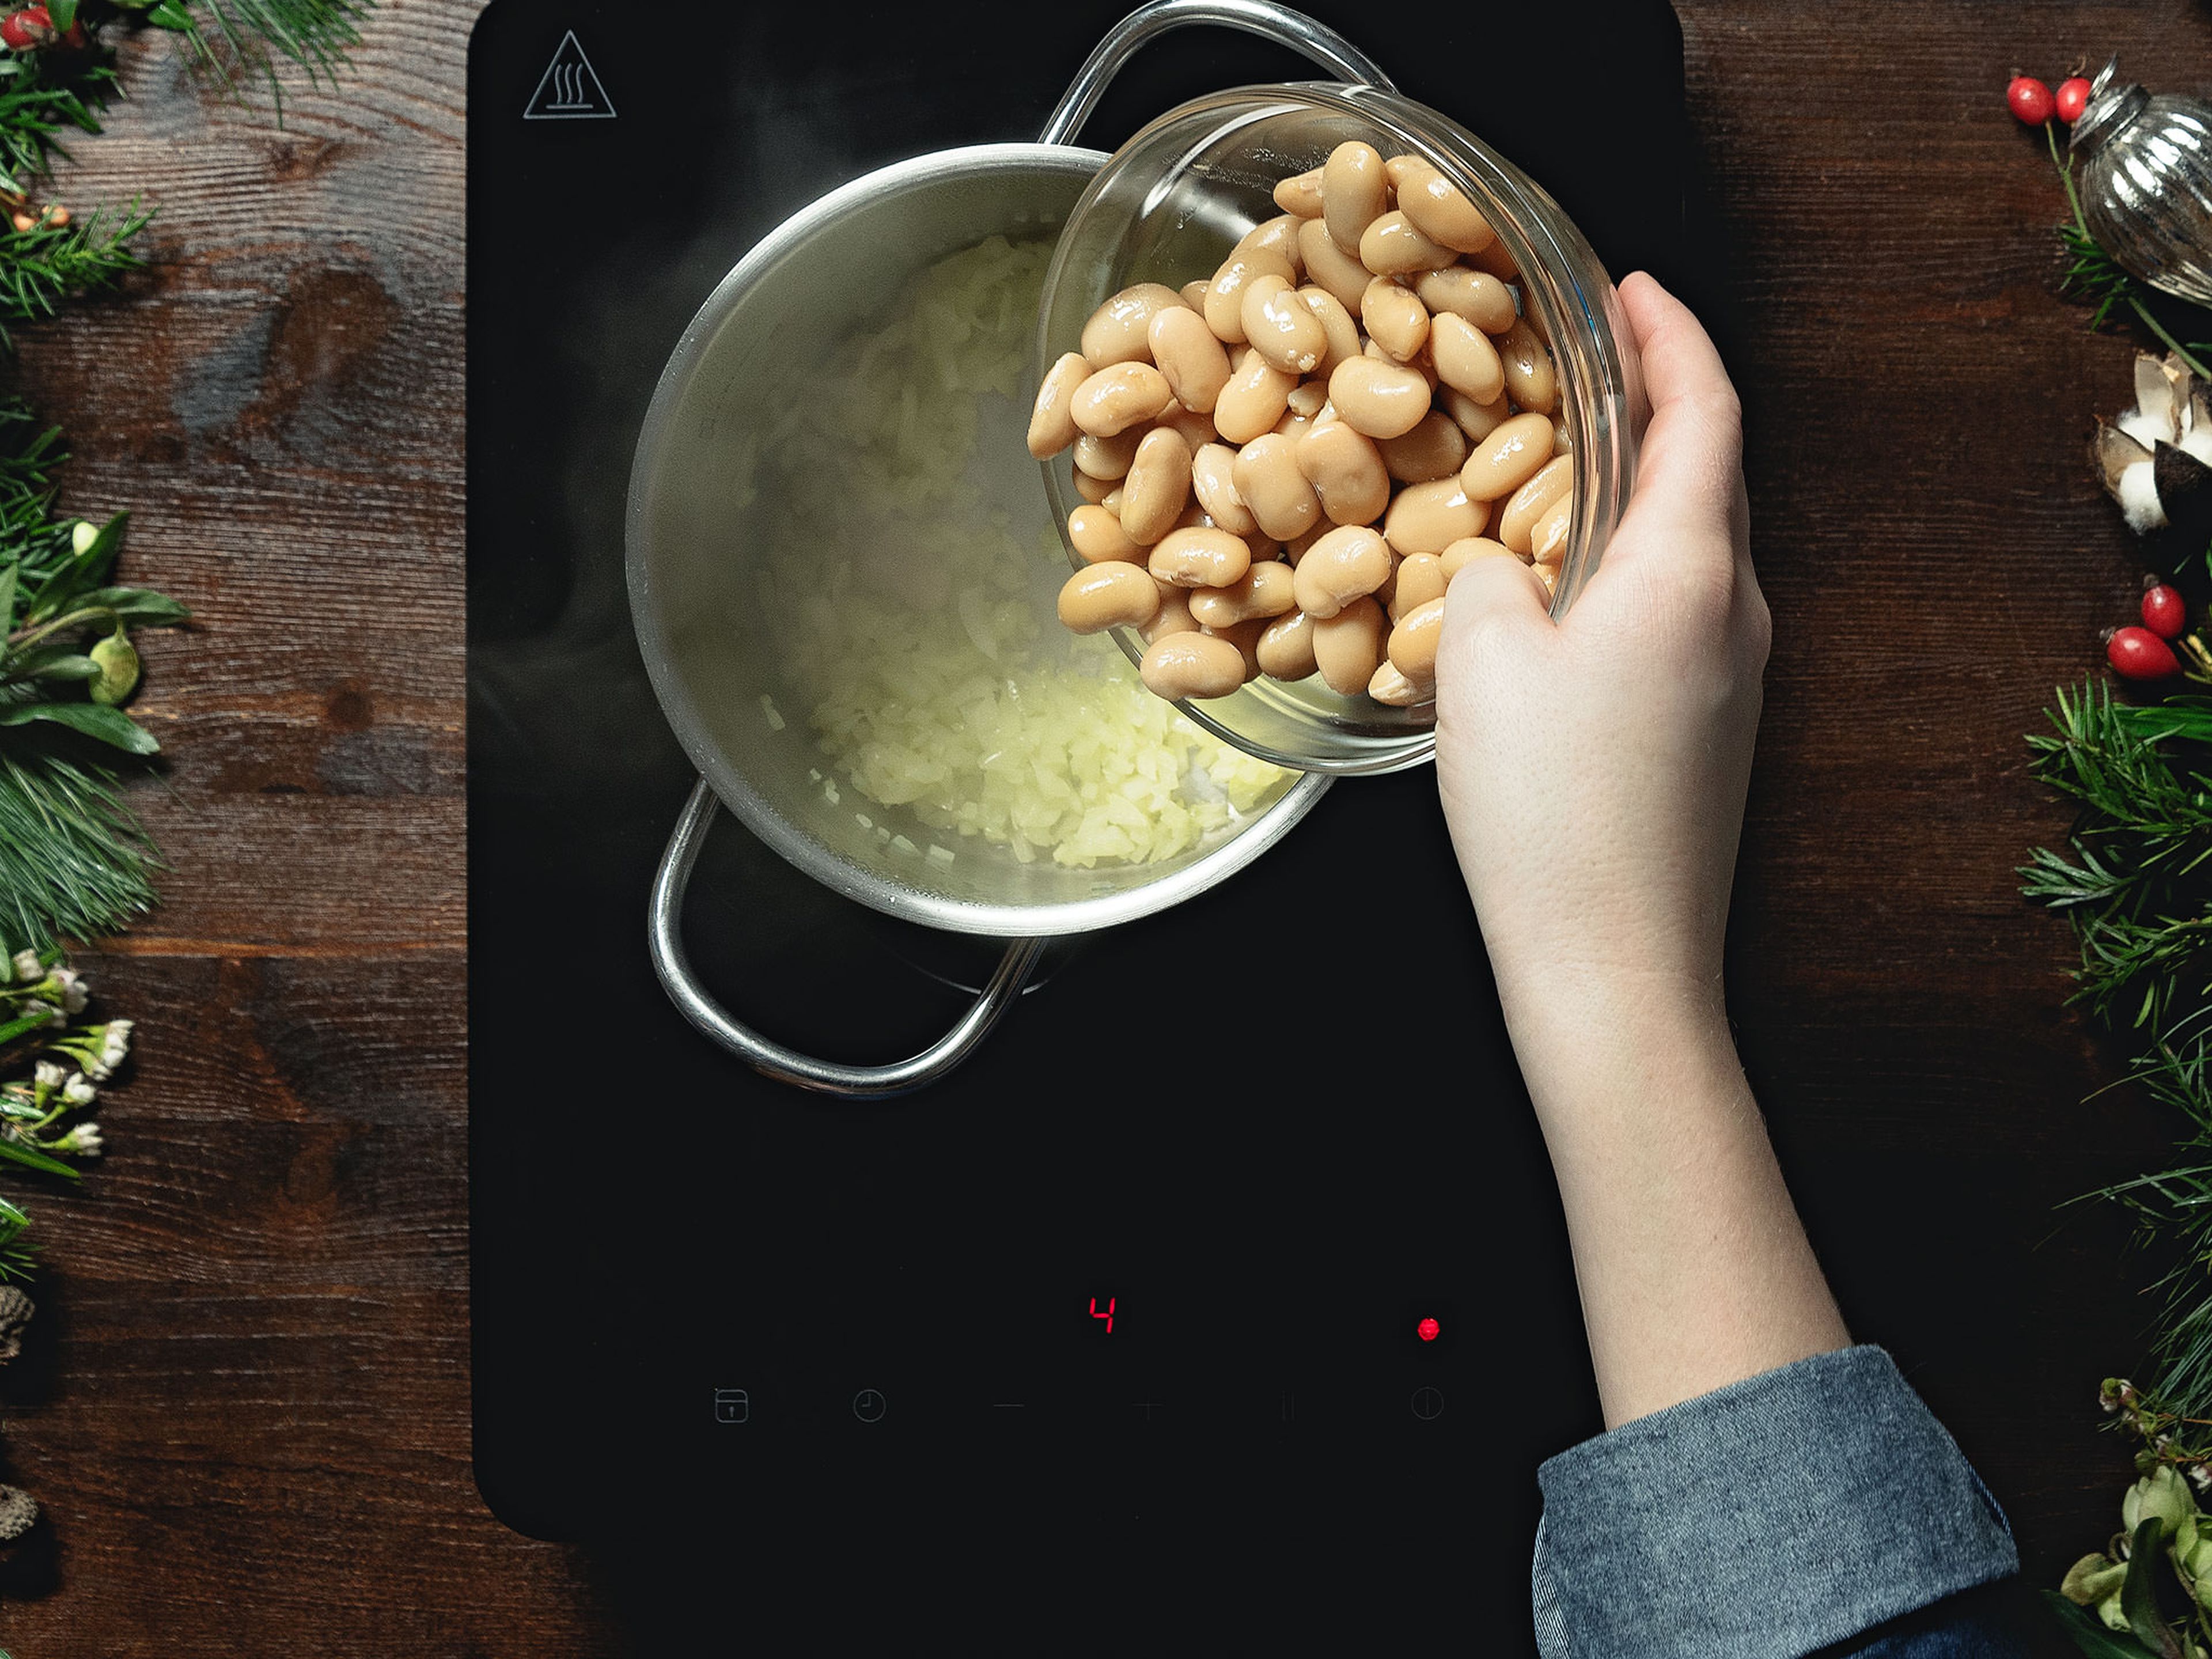 For the bean purée, rinse the beans under cold water and drain. In a small pot, heat the olive oil and sauté the onion. Add beans, vegetable broth, and salt and let cook approx. 5 min., then purée with an immersion blender until smooth. Set aside for serving.